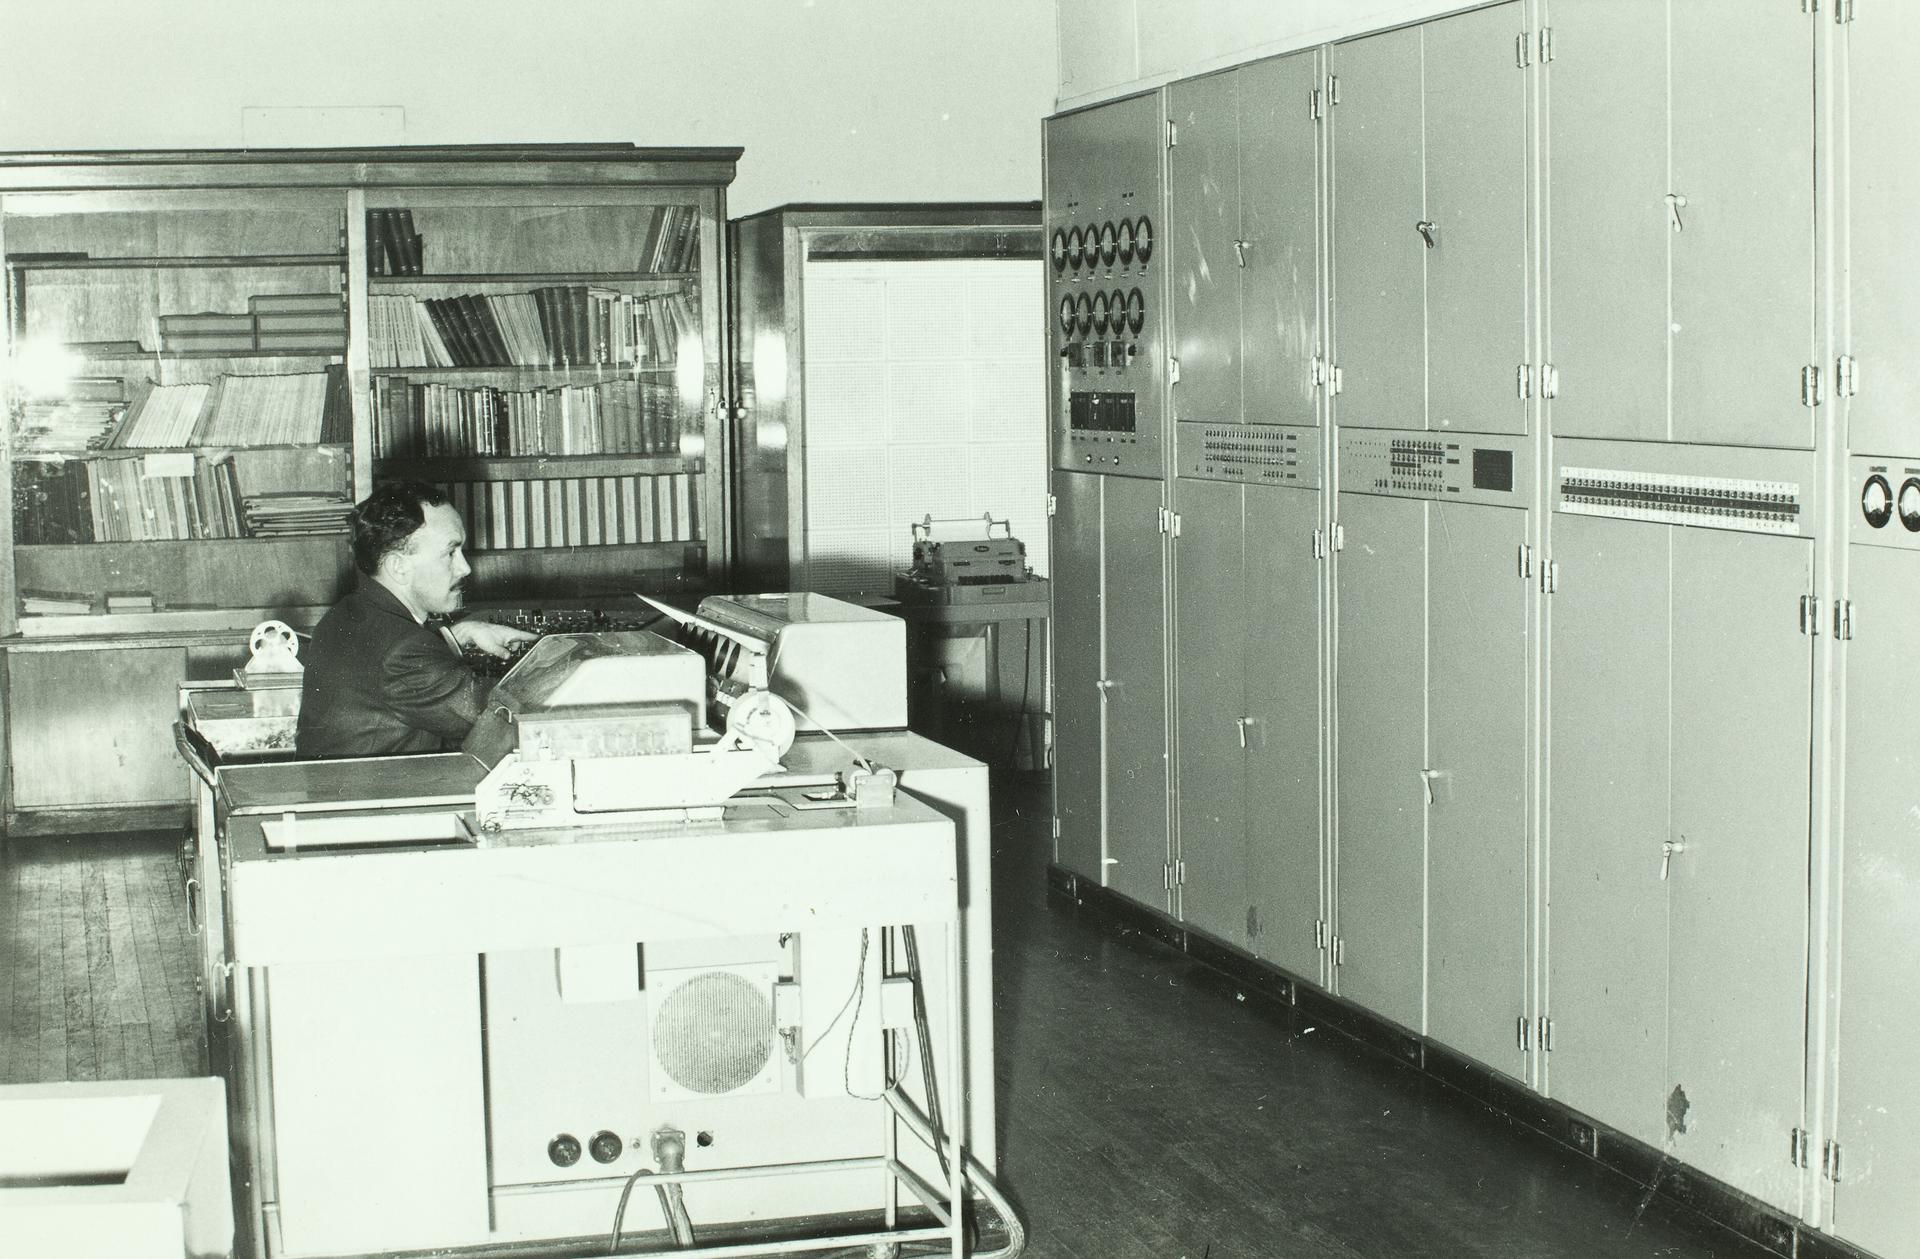 CSIRAC with staff member at the control panel, c1958